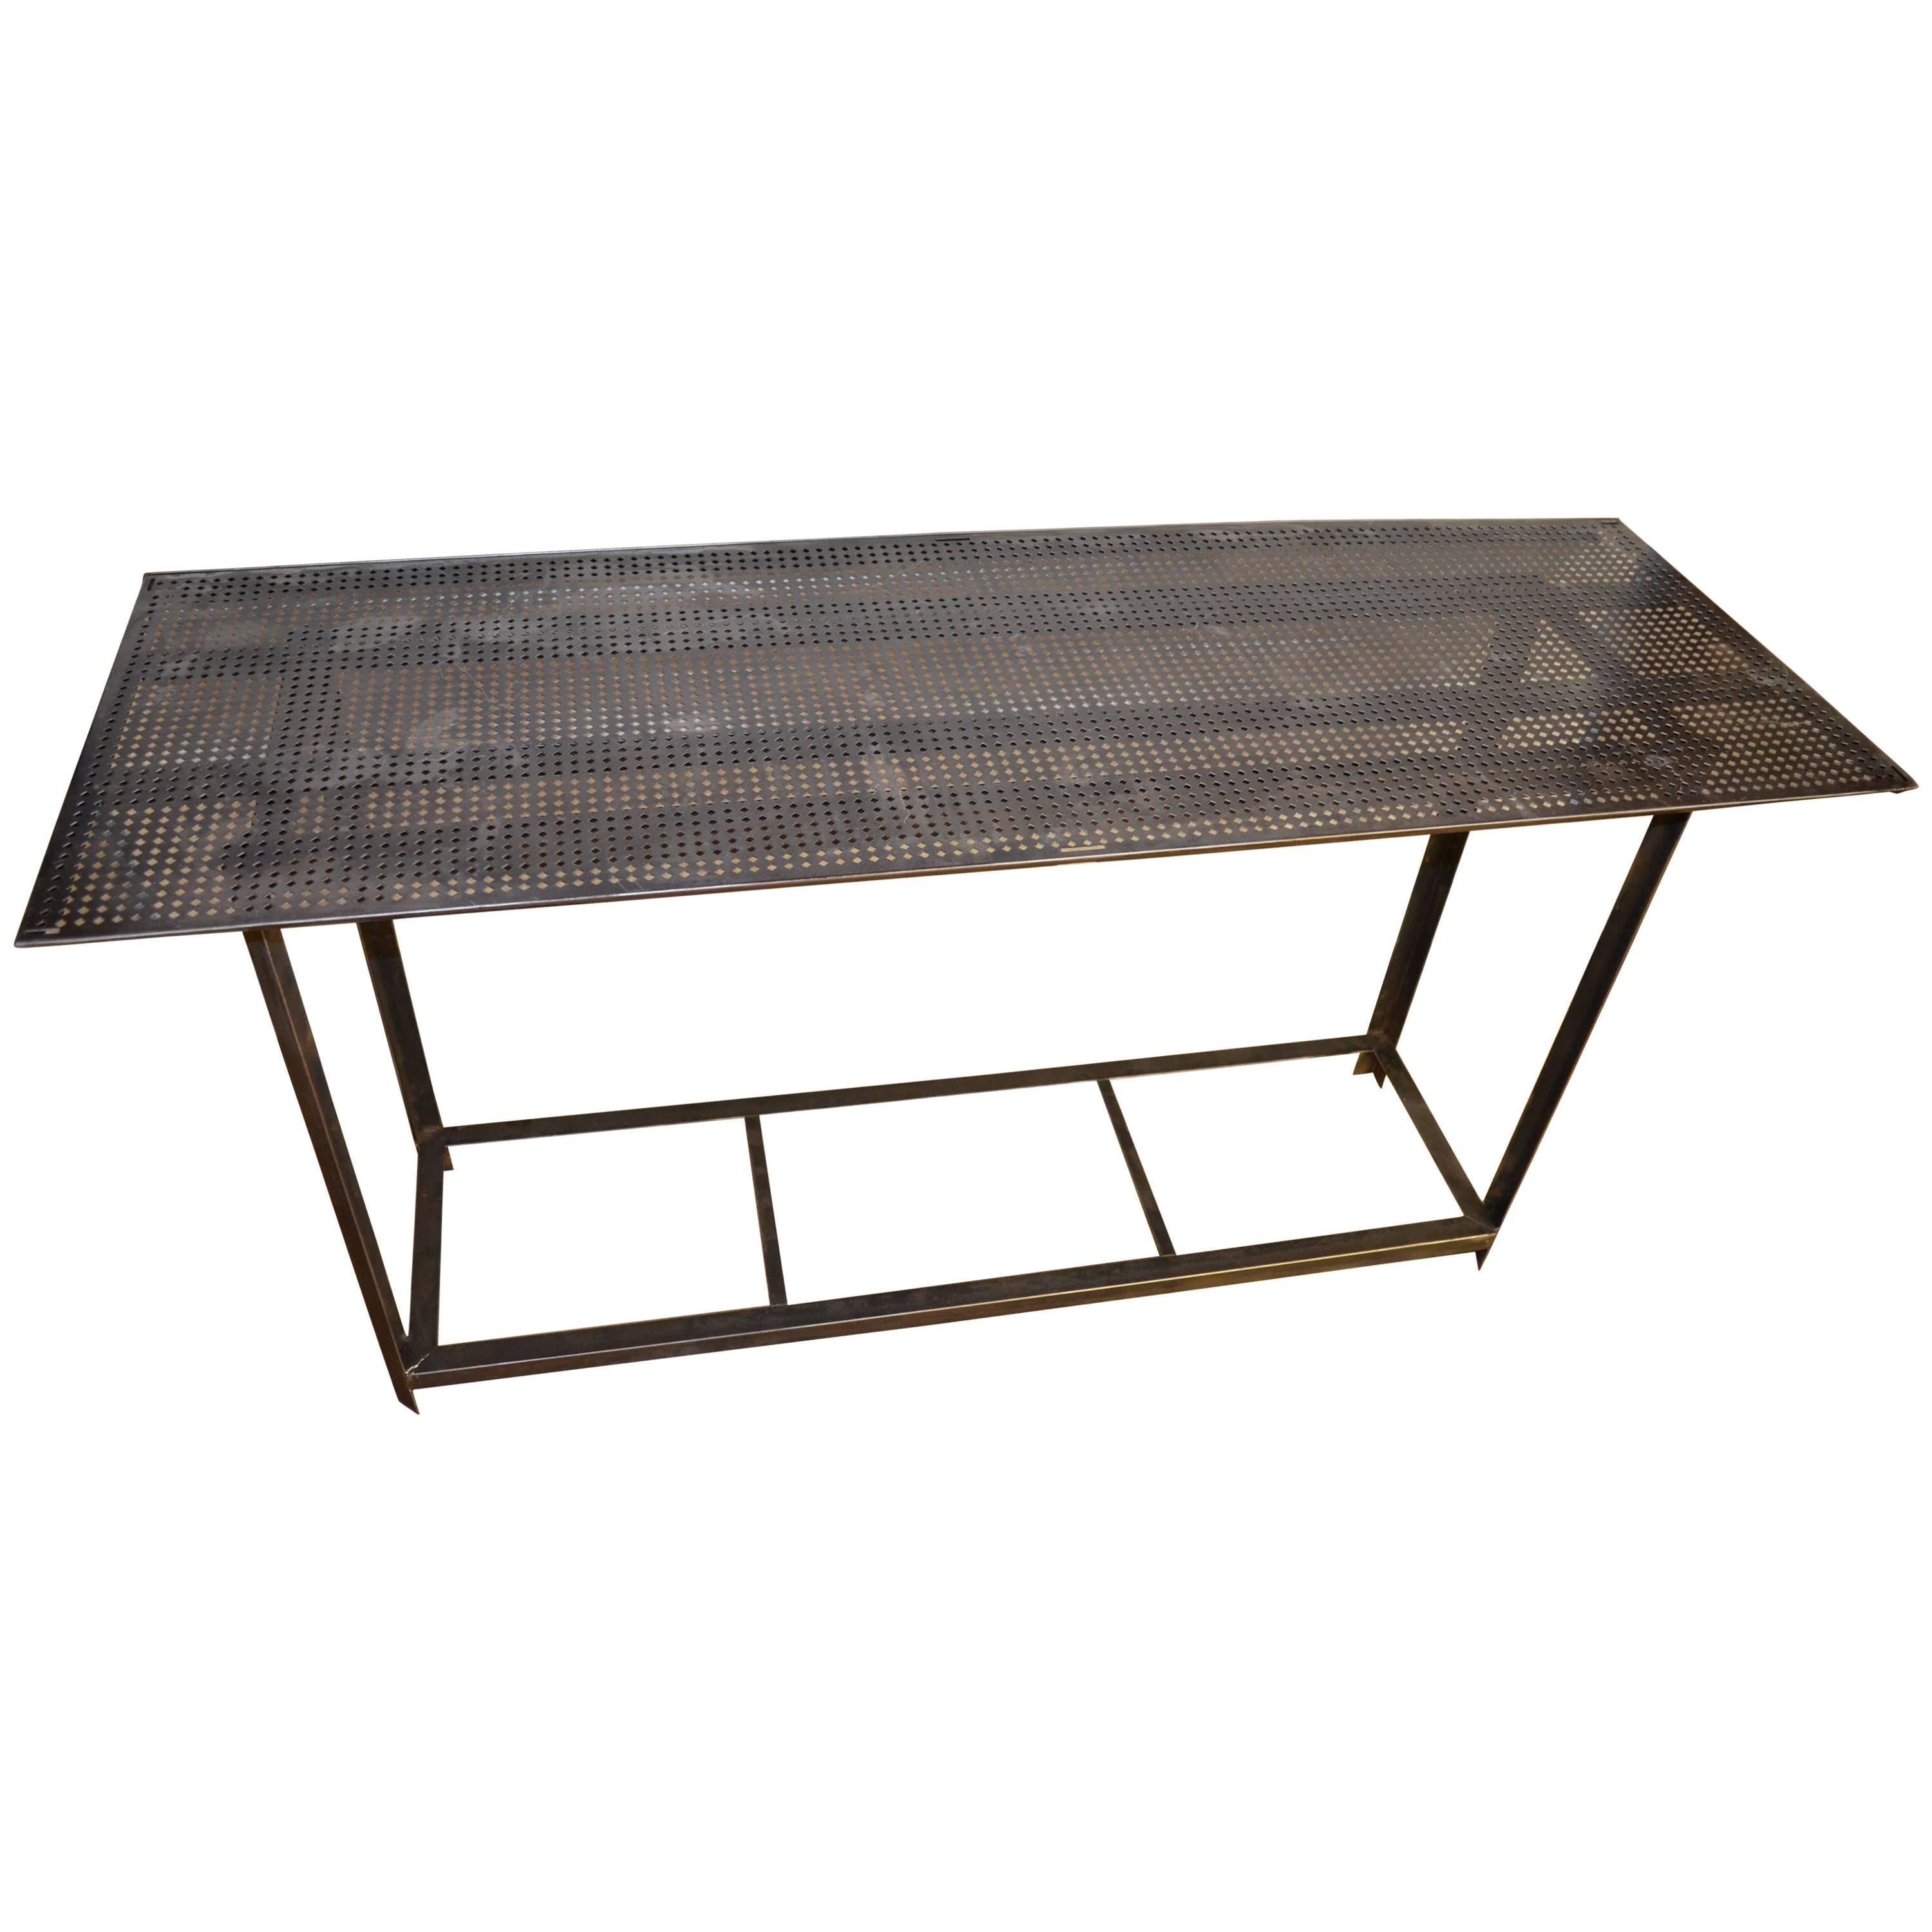 Industrial Work Table with Steel Grate Top  